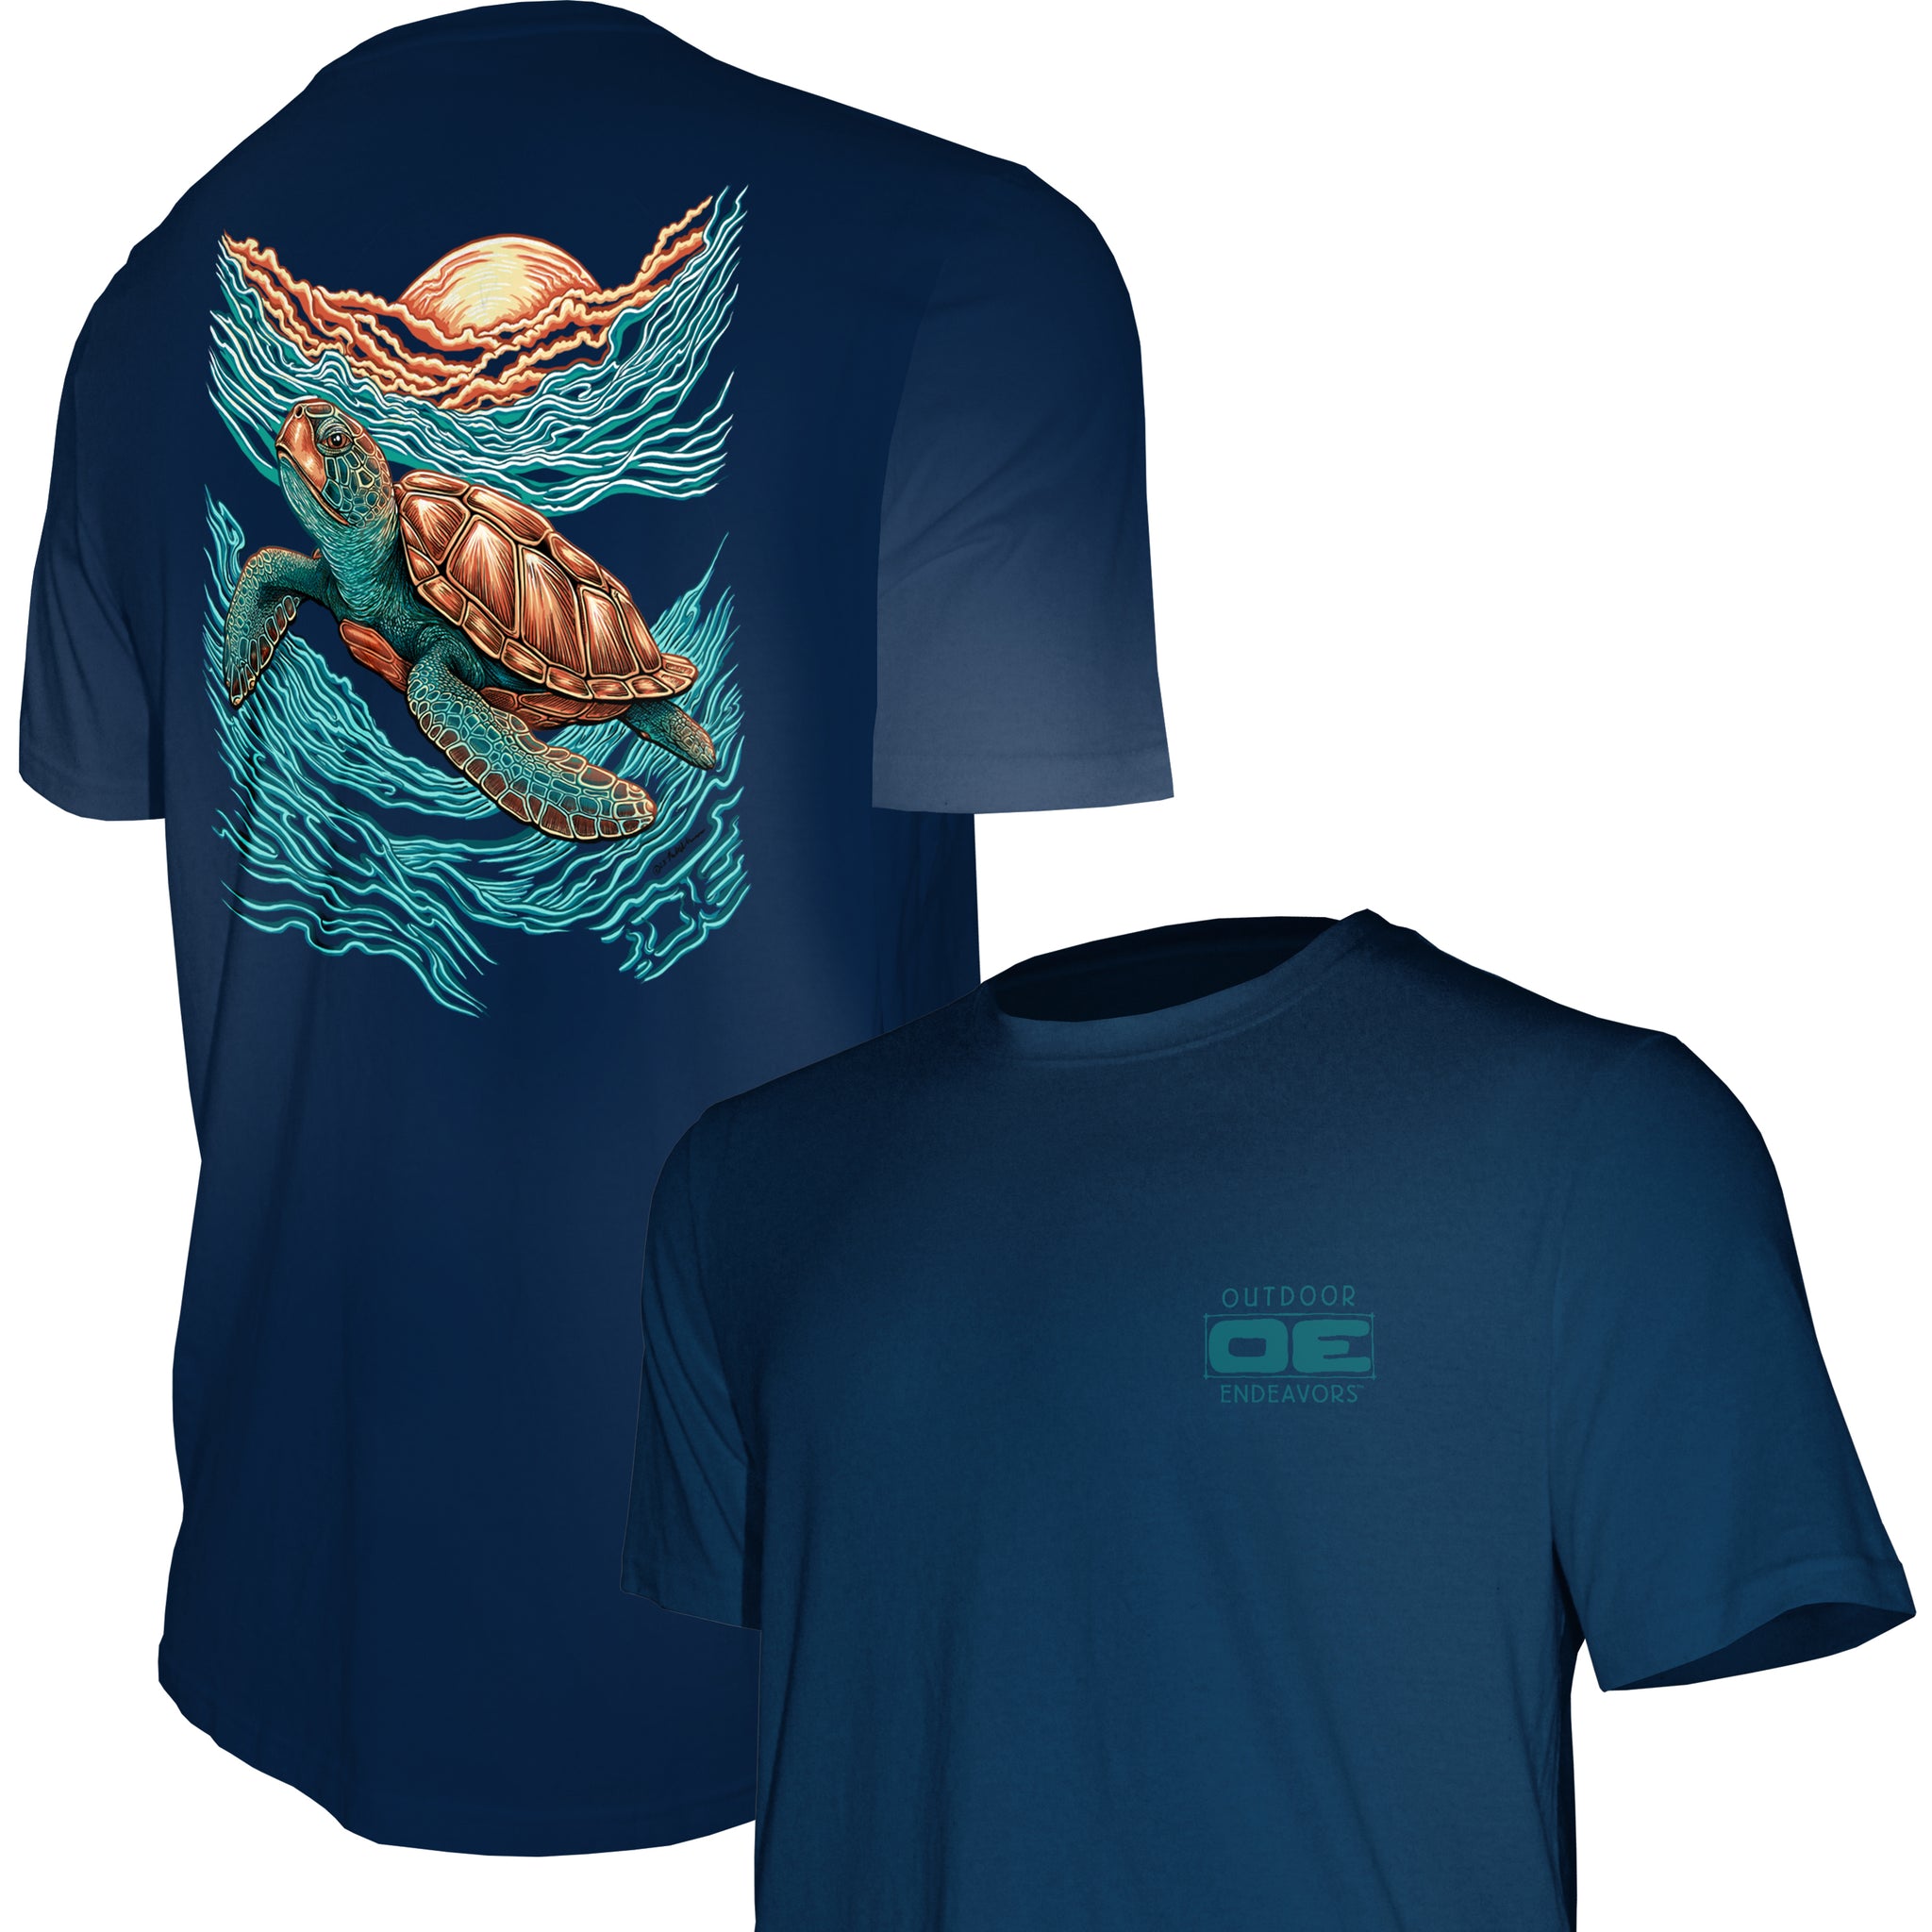 Outdoor Endeavors Out There- American Made Tee - Sea Turtle